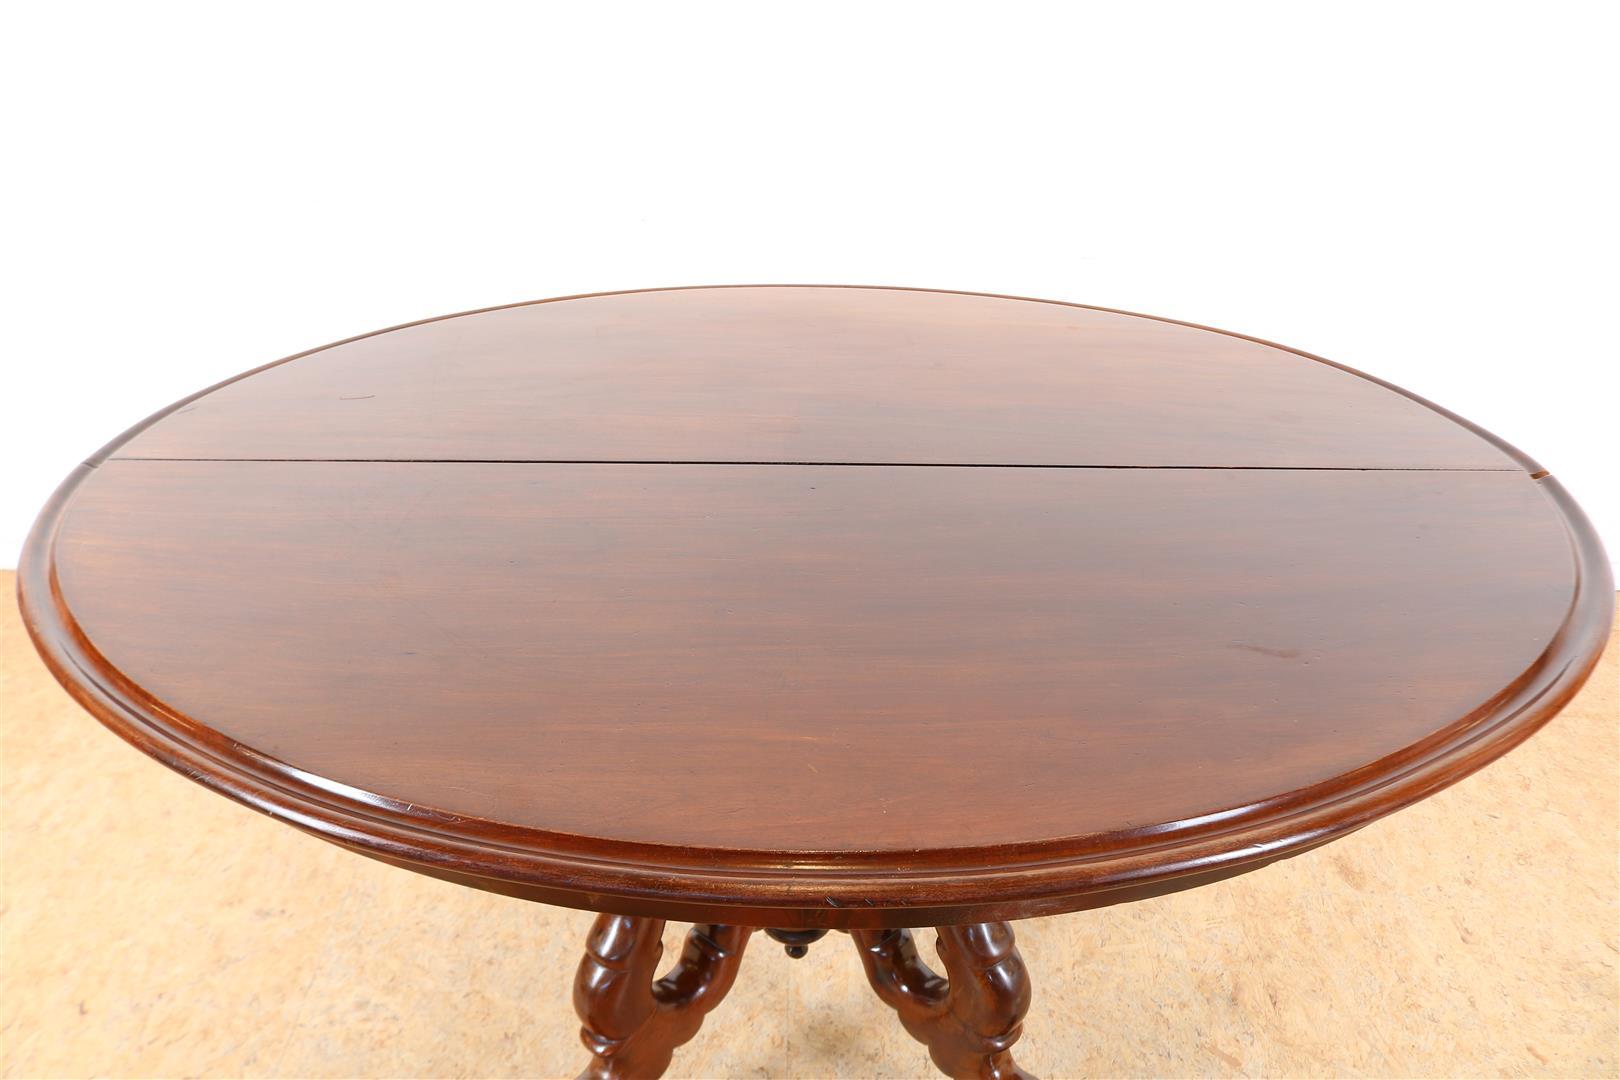 Mahogany Biedermeier coulisse table on spider head leg, 19 century, 74 x 135 x 108 cm, with - Image 3 of 7